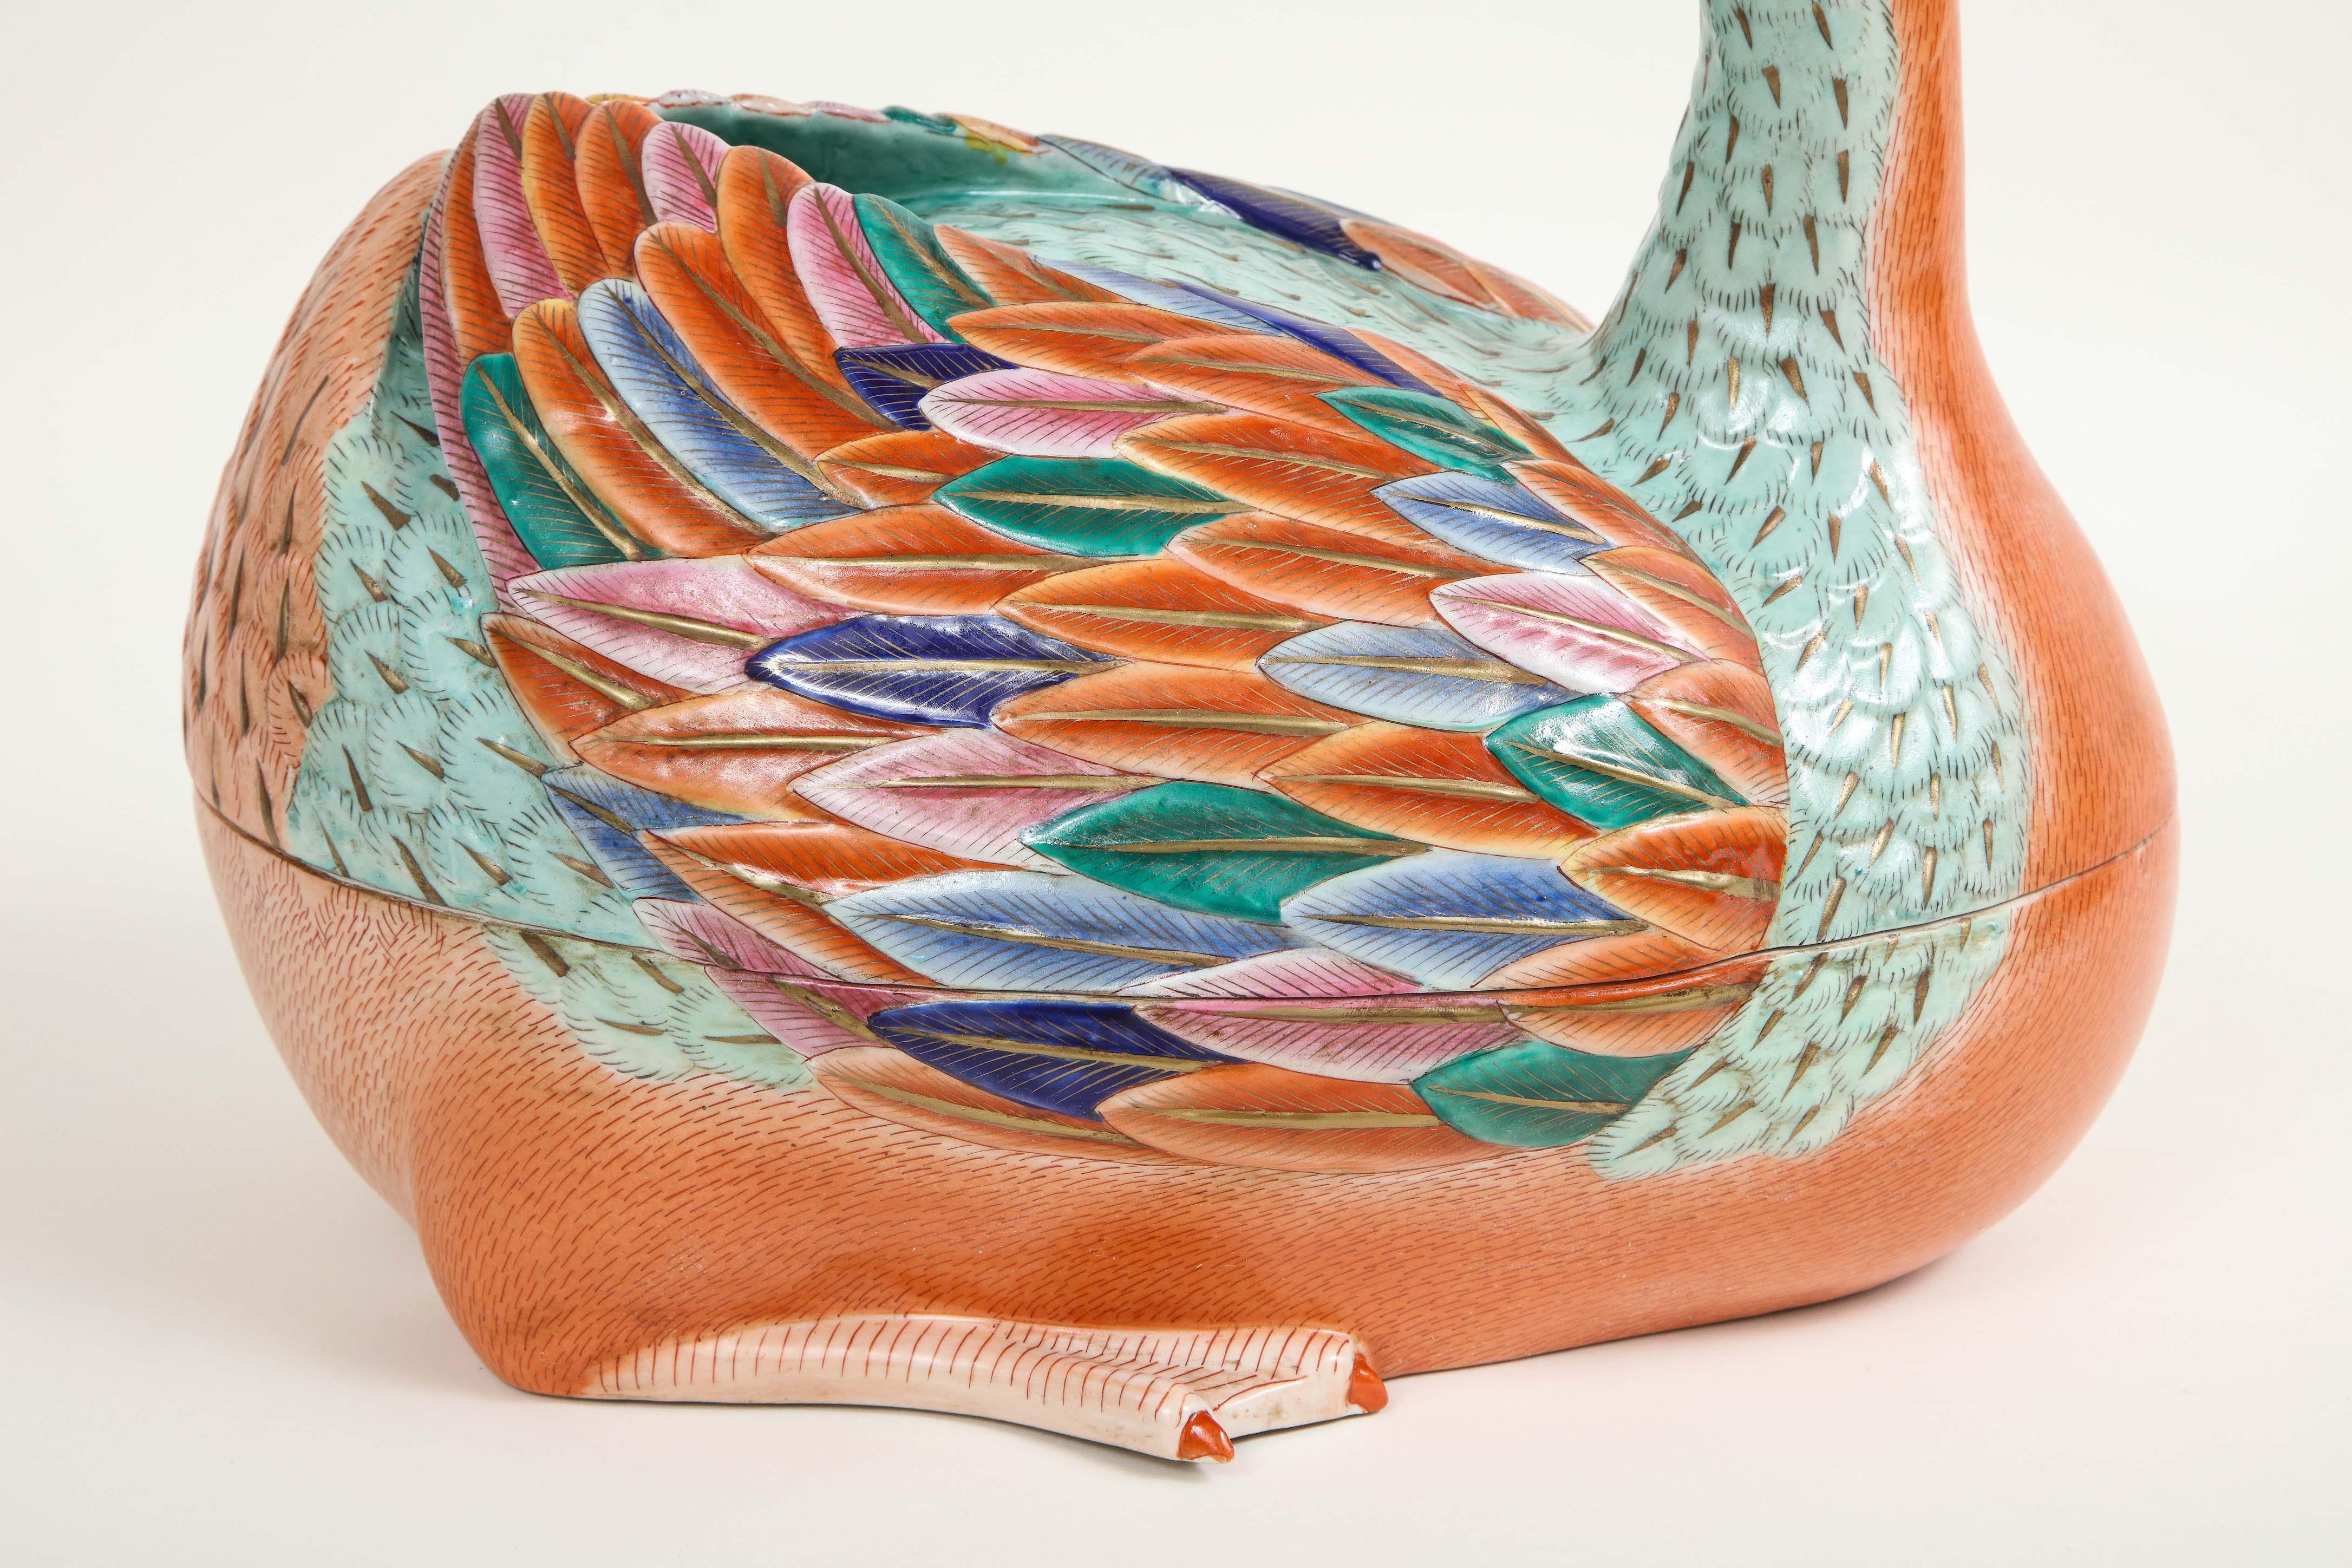 In the form of a sitting duck after 18th century models and in two parts; decorated profusely in aqua, orange, and cobalt blue with gilt highlights.